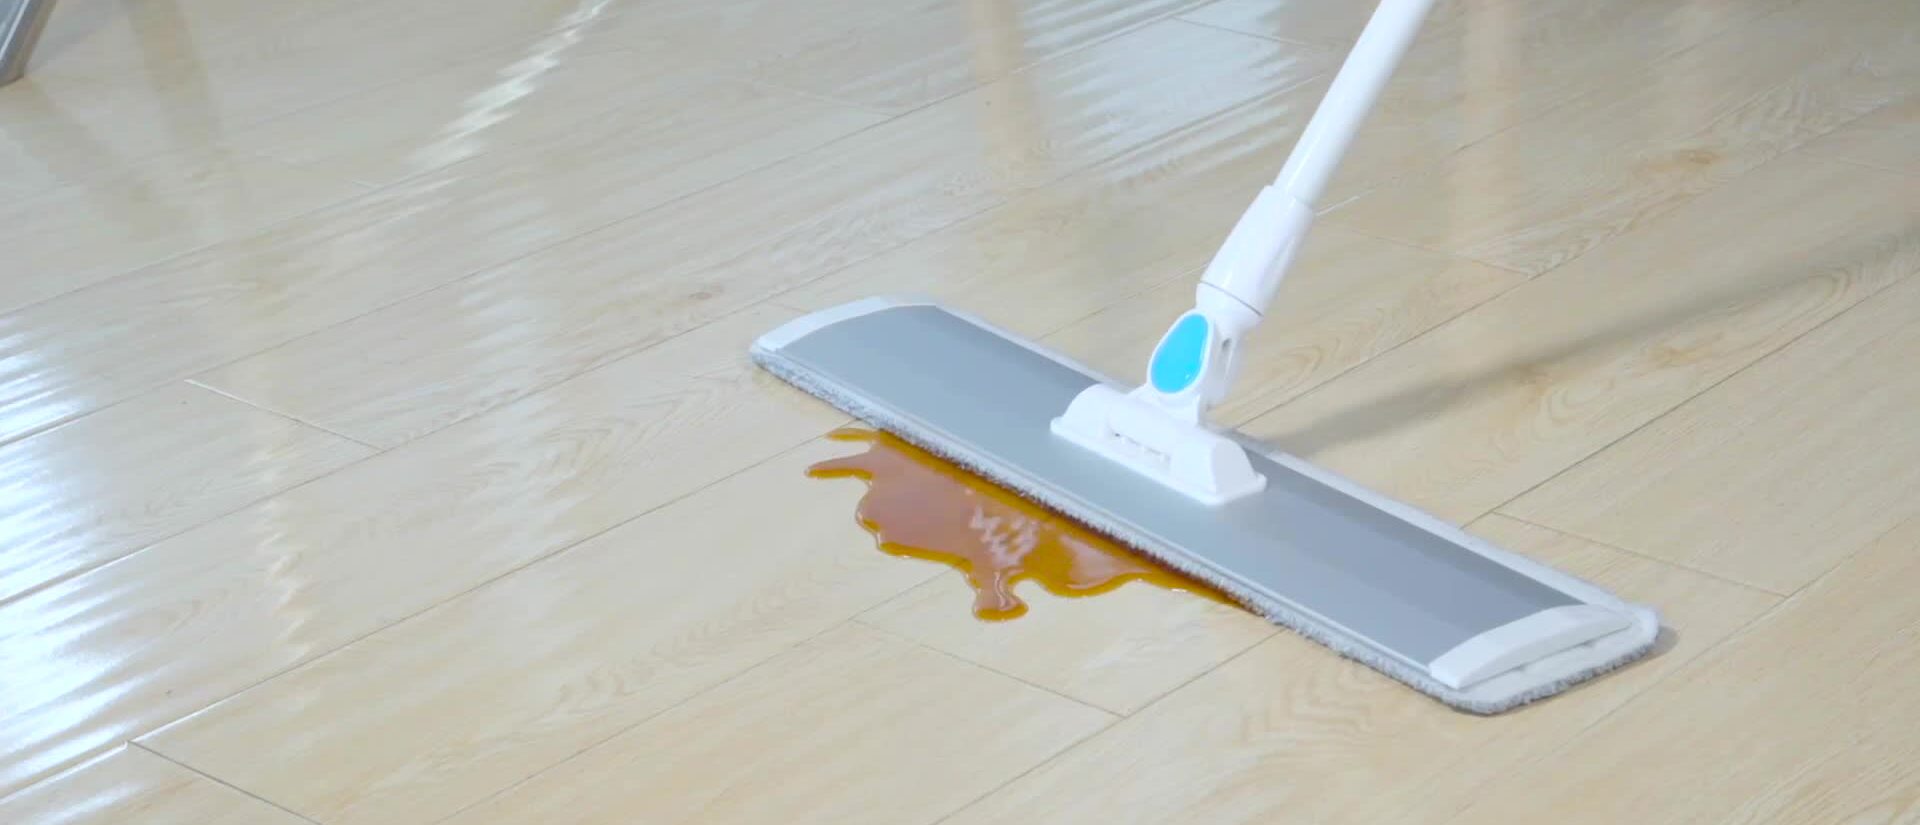 How to clean sticky floor. Crisis averted